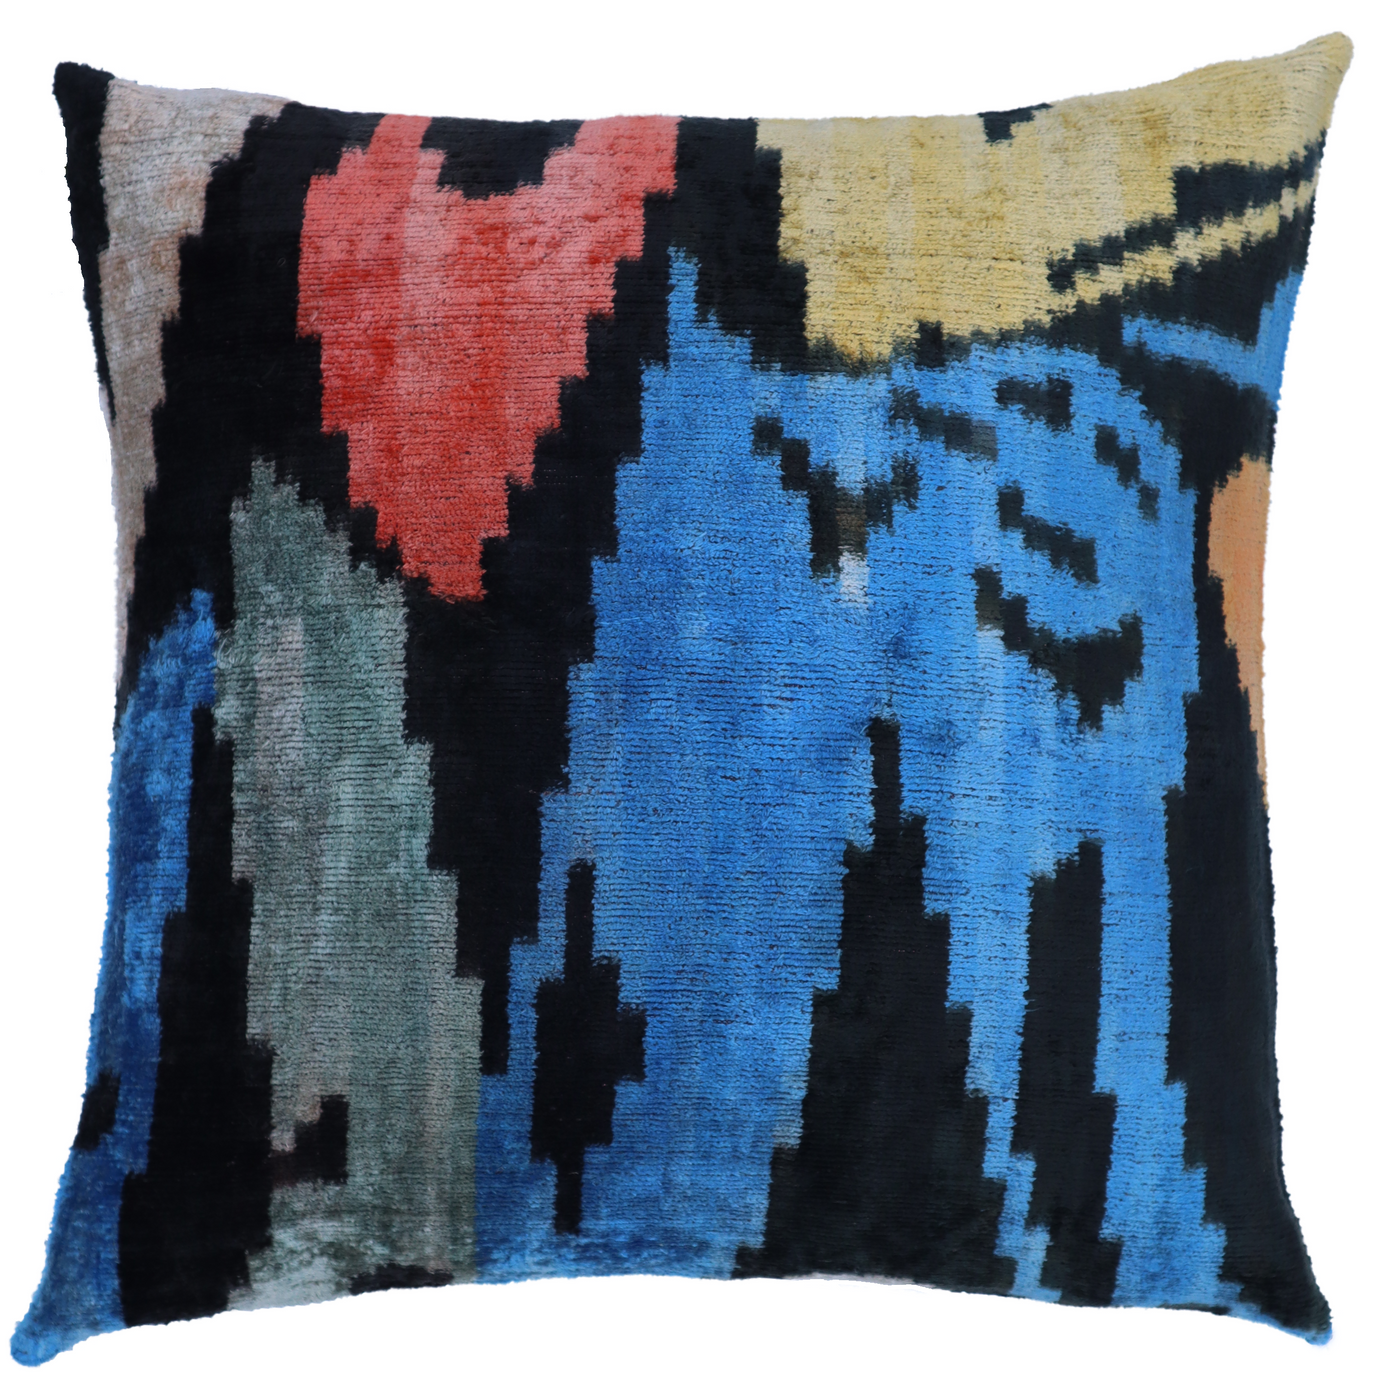 Canvello Velvet Abstract Square Pillow with Down Insert - 18x18 in